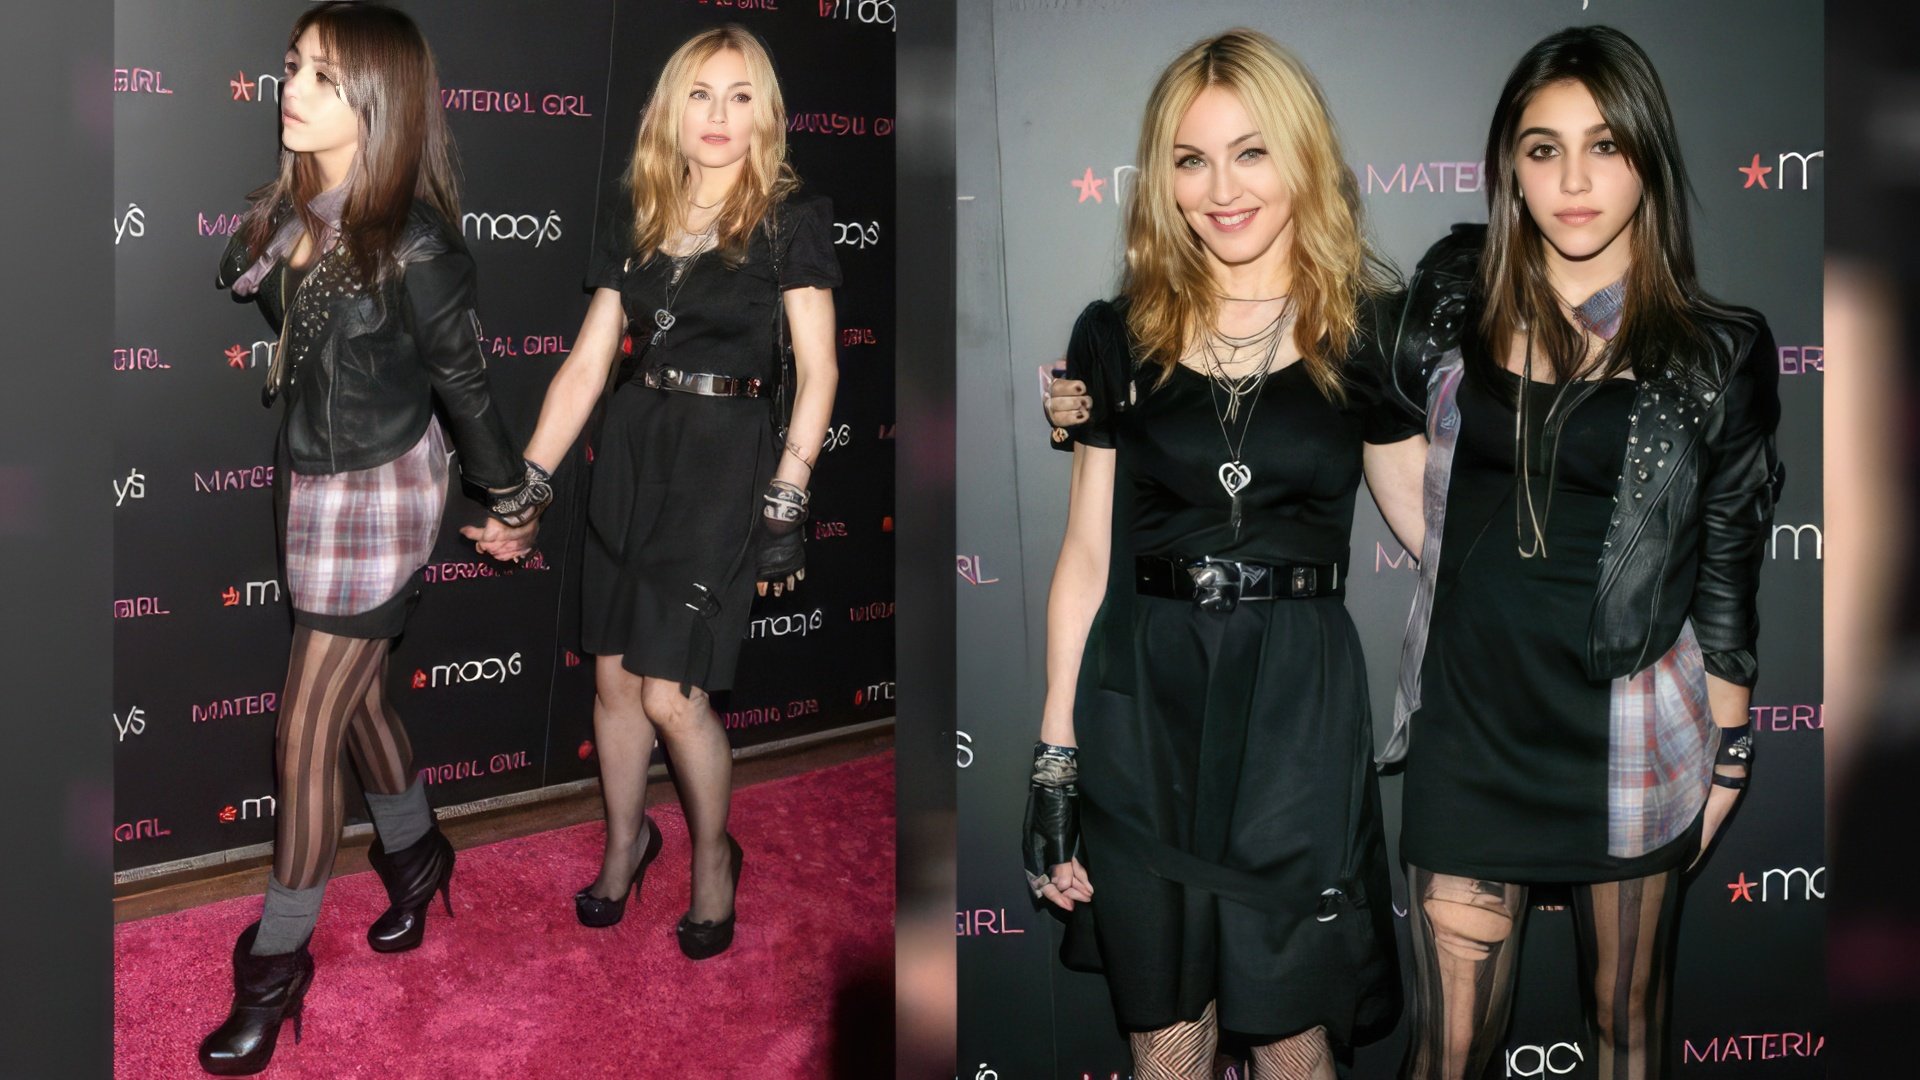 Madonna and her daughter Lourdes present a clothing line